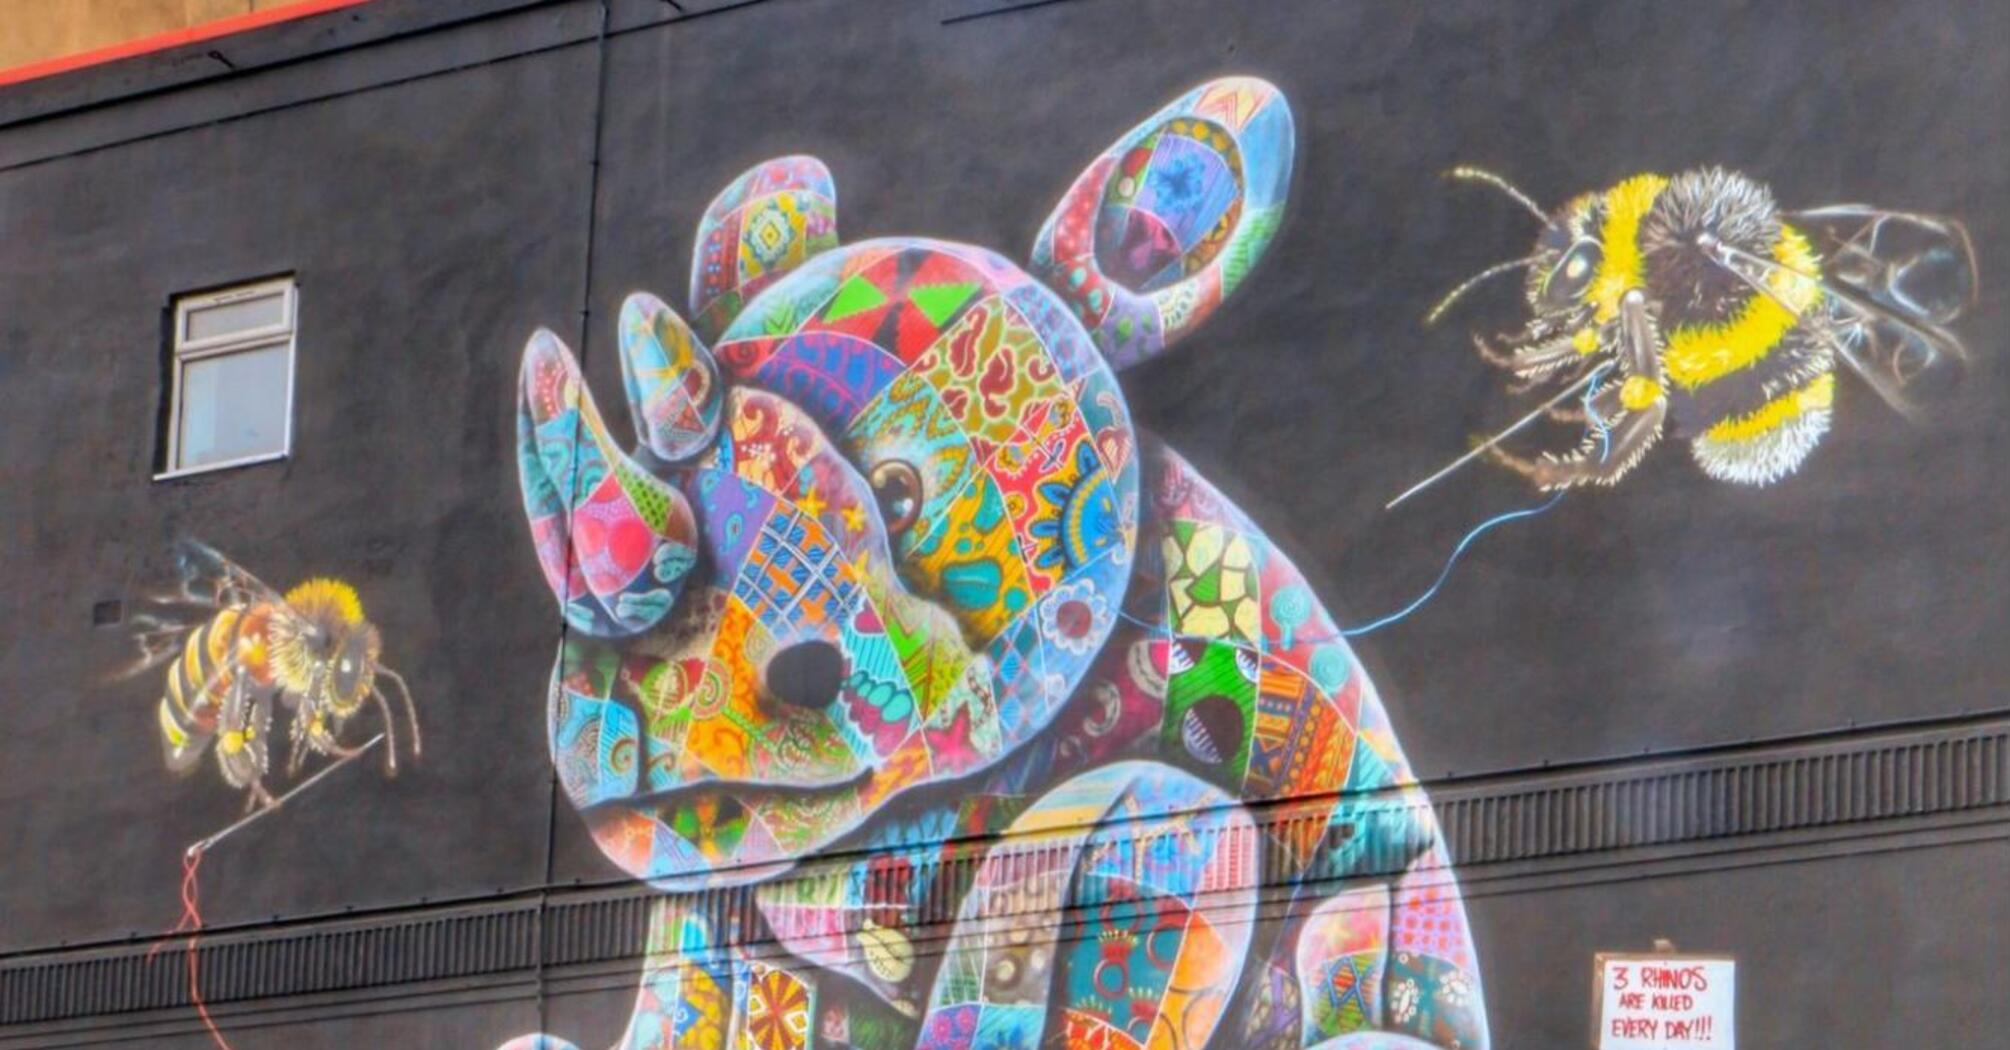 A mural of a patchwork rhinoceros